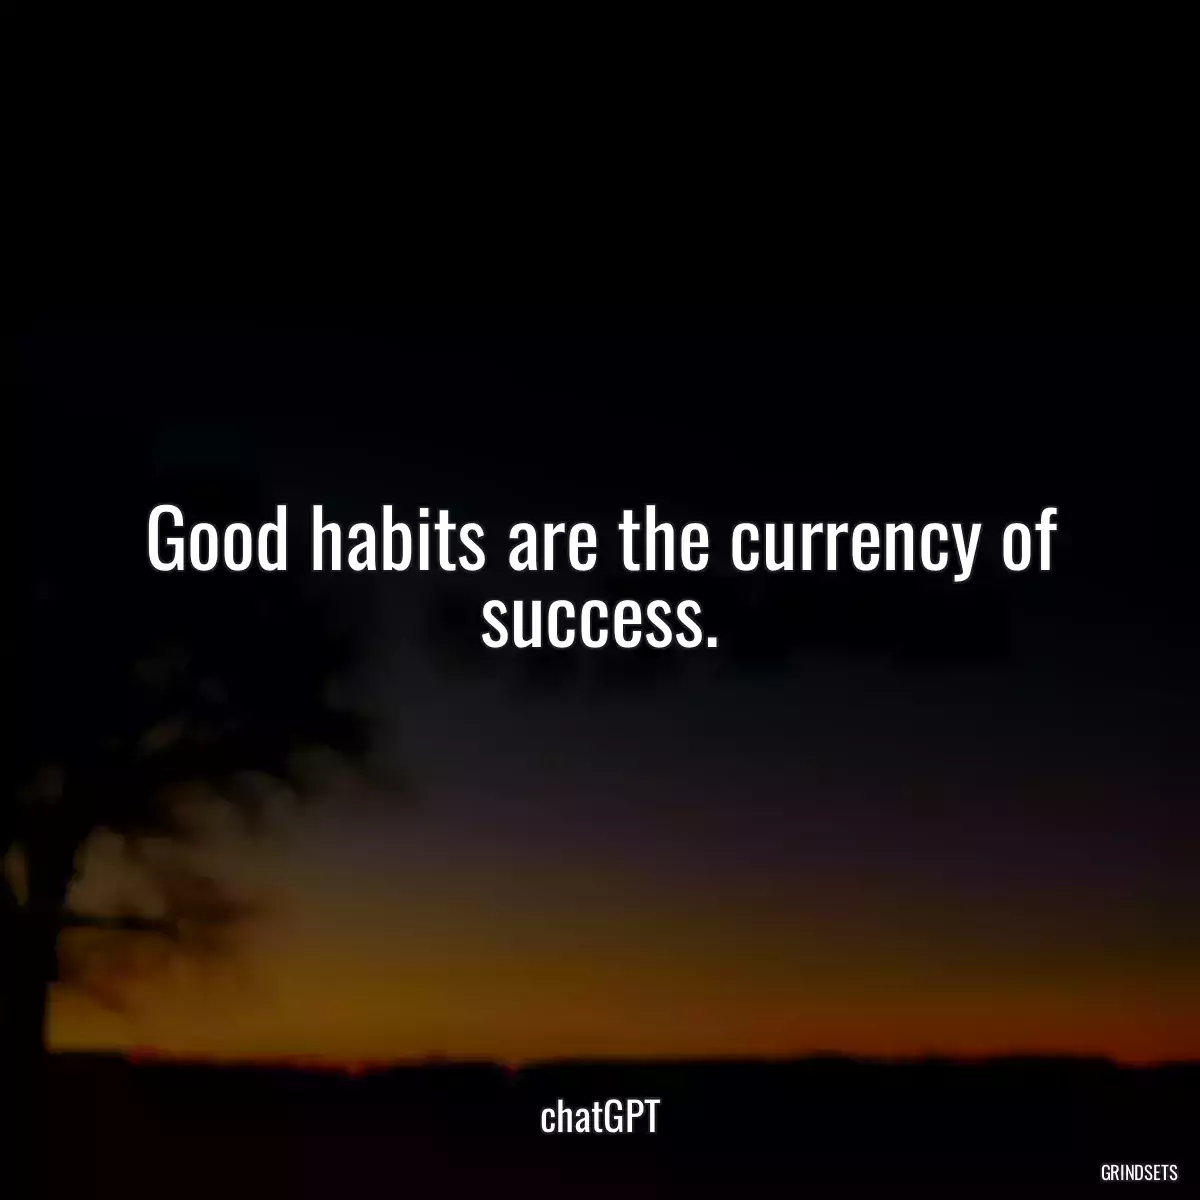 Good habits are the currency of success.